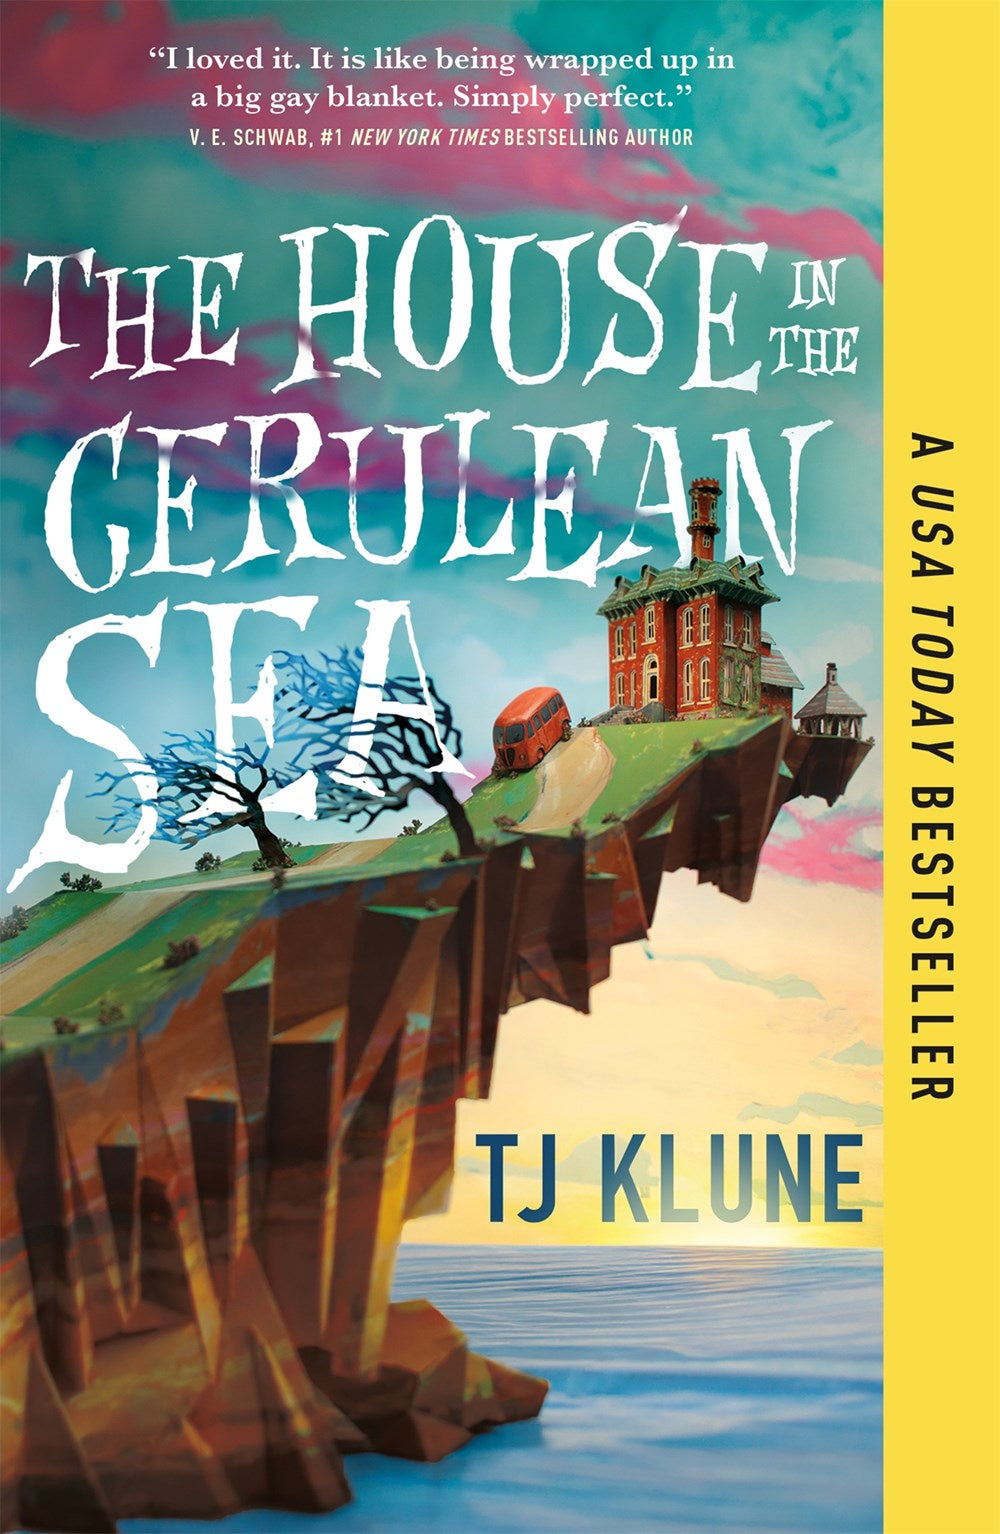 the house in the cerulean sea book 2